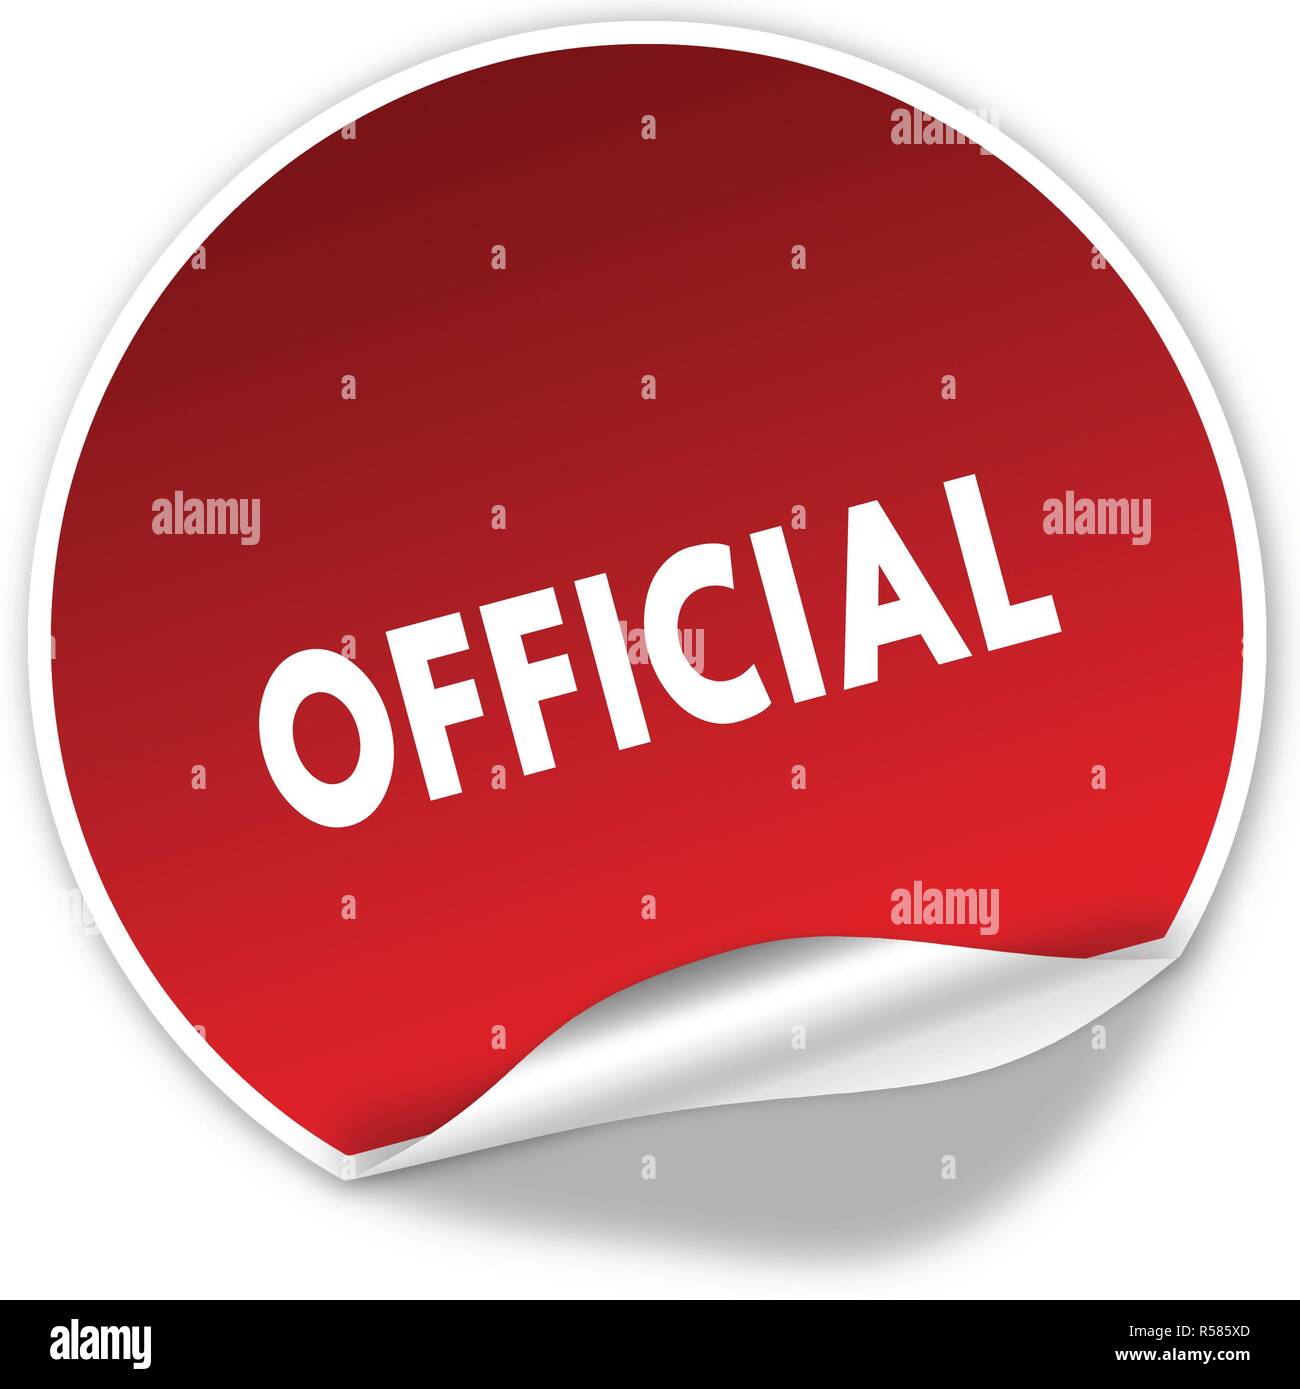 OFFICIAL text on realistic red sticker on white background. Stock Photo